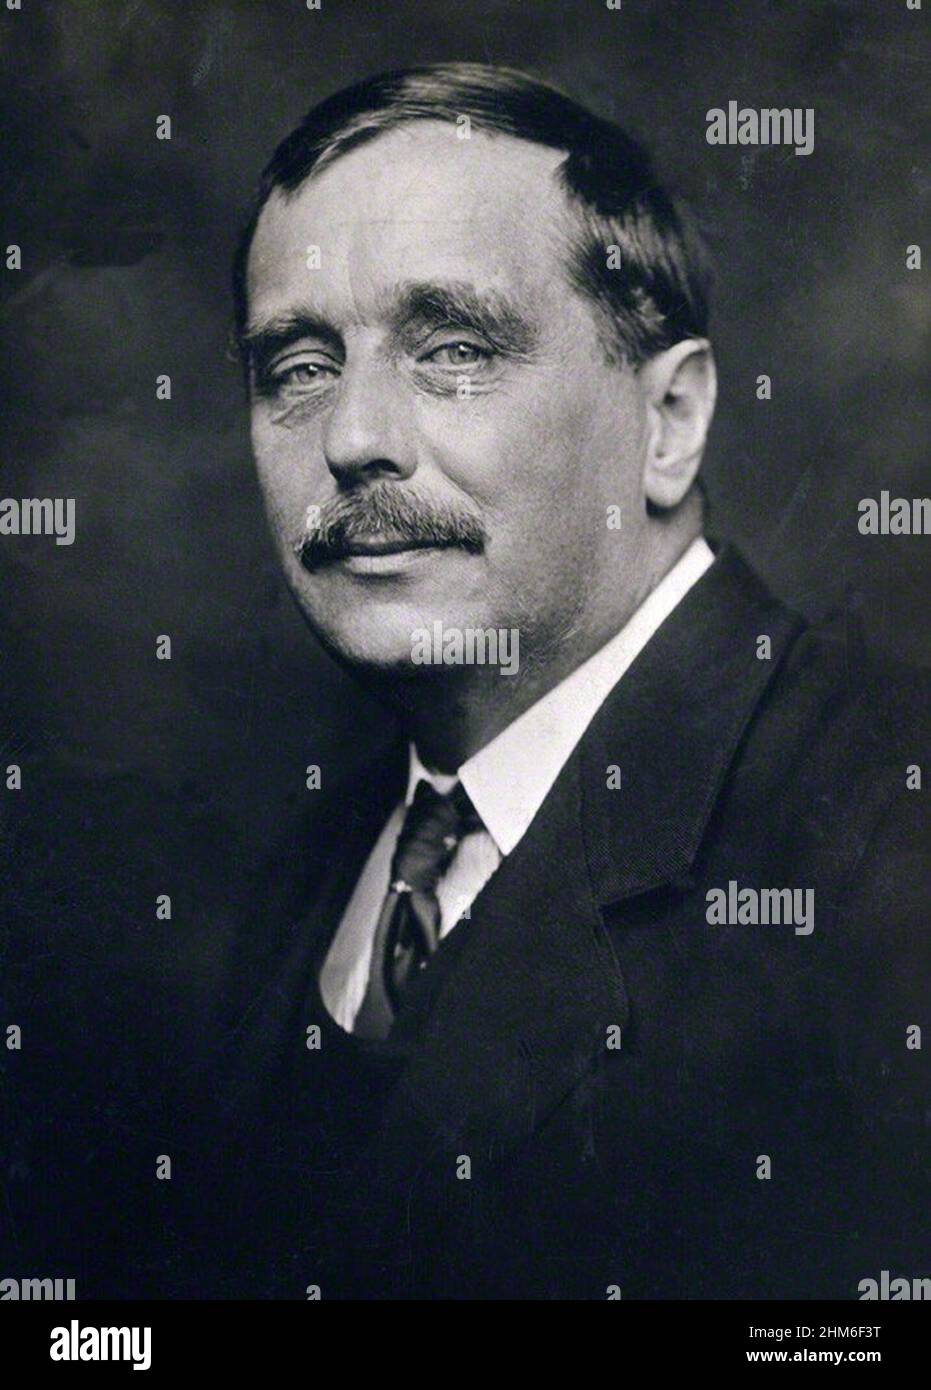 A portrait of the English writer HG Wells, author of The Time Machine, from 1920 when he was 54 yrs old. Stock Photo